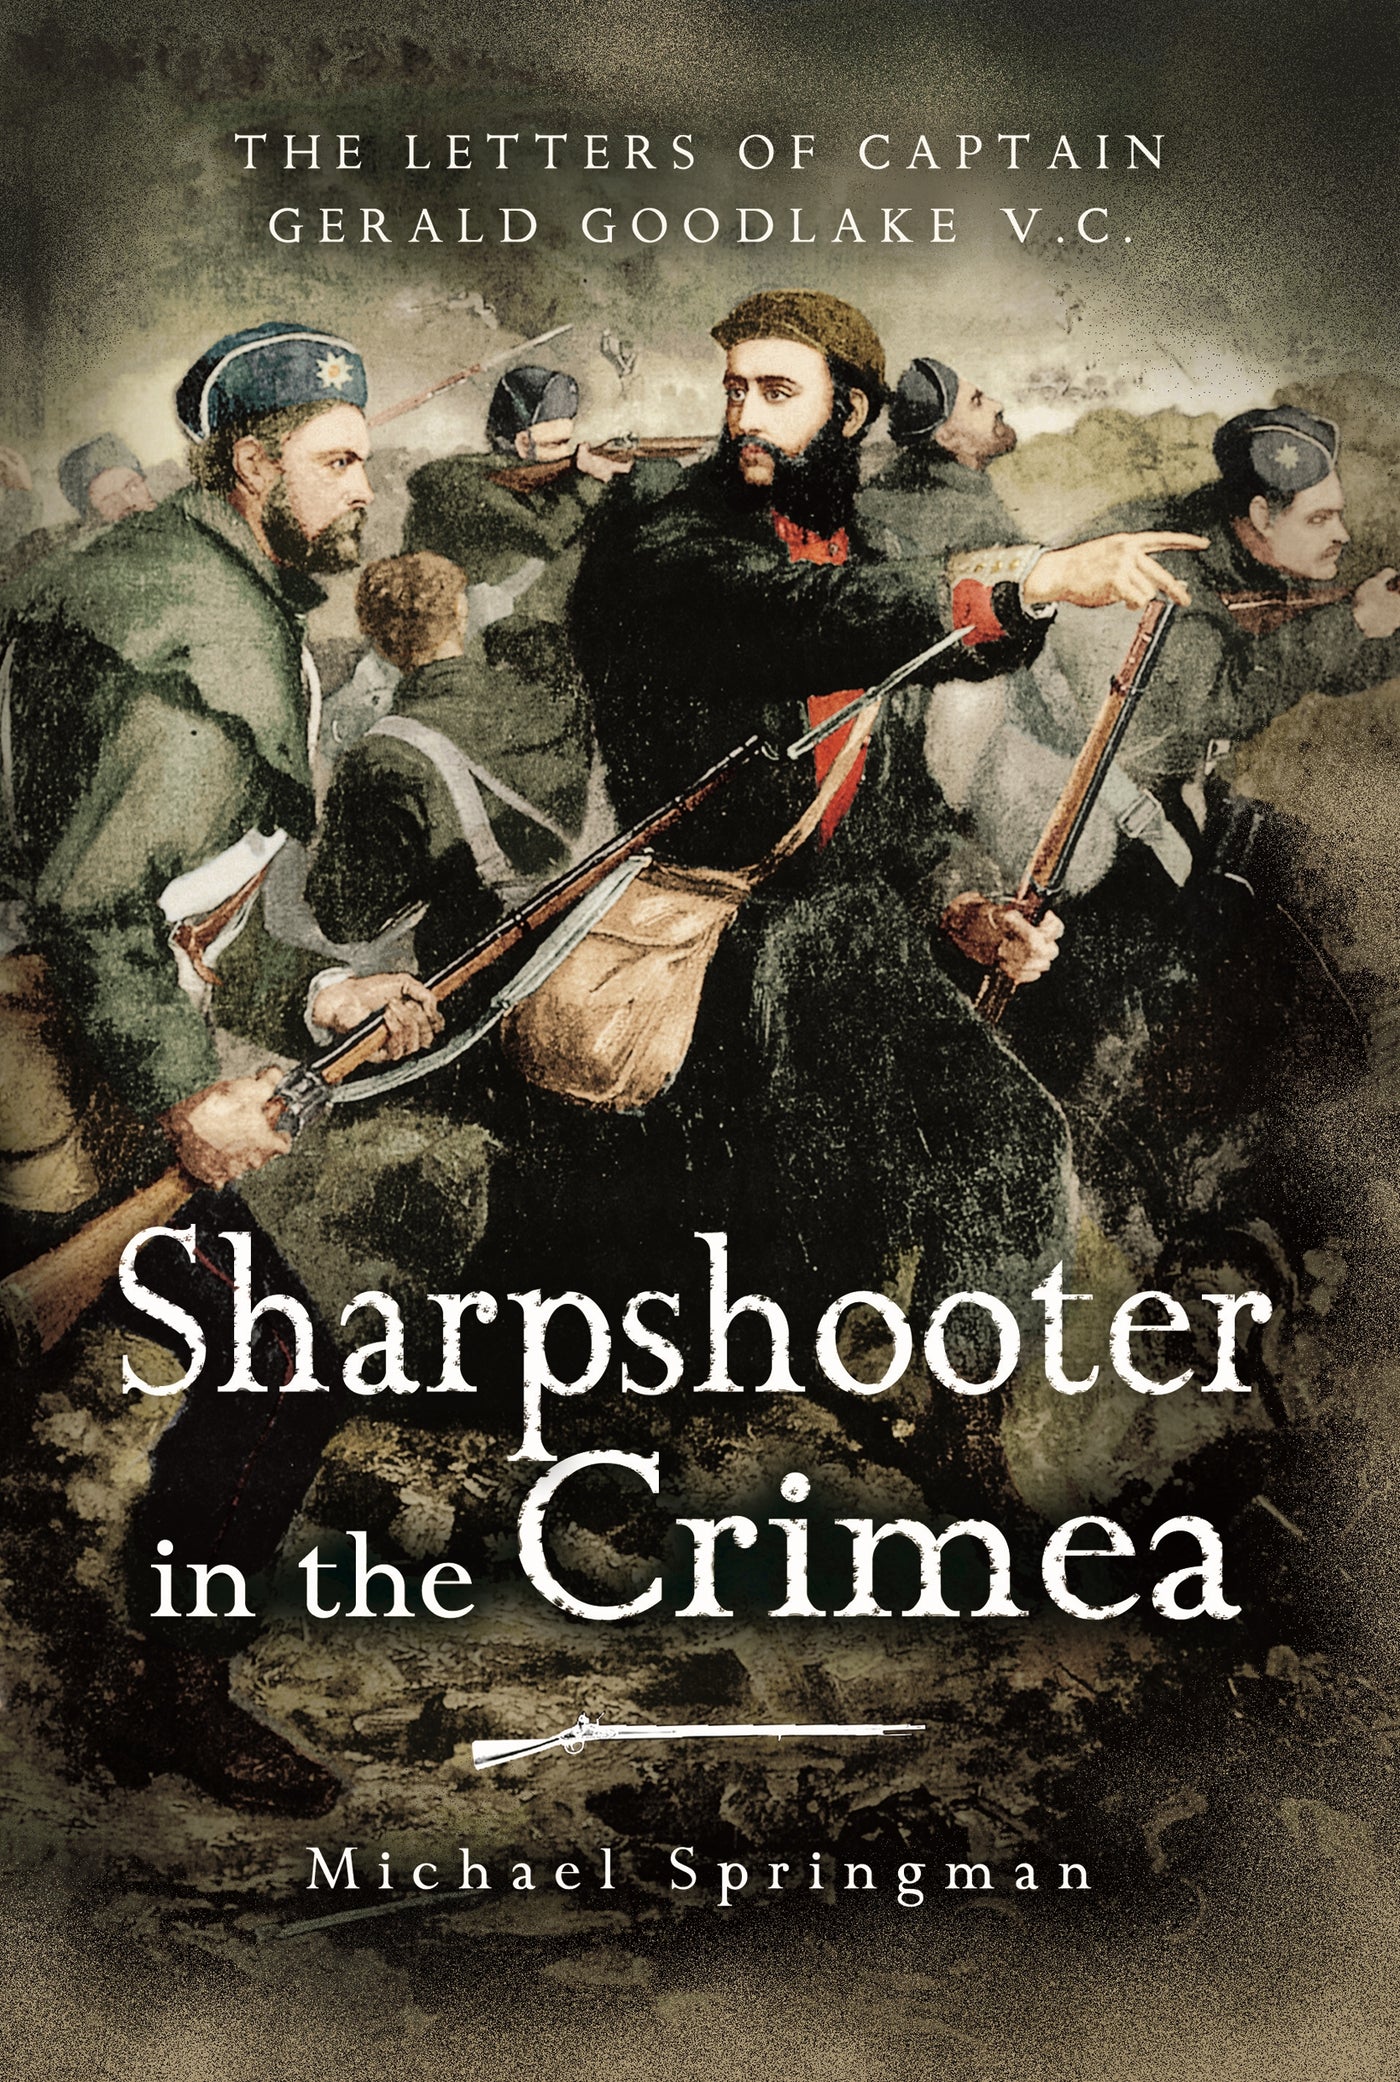 Sharpshooter in the Crimea